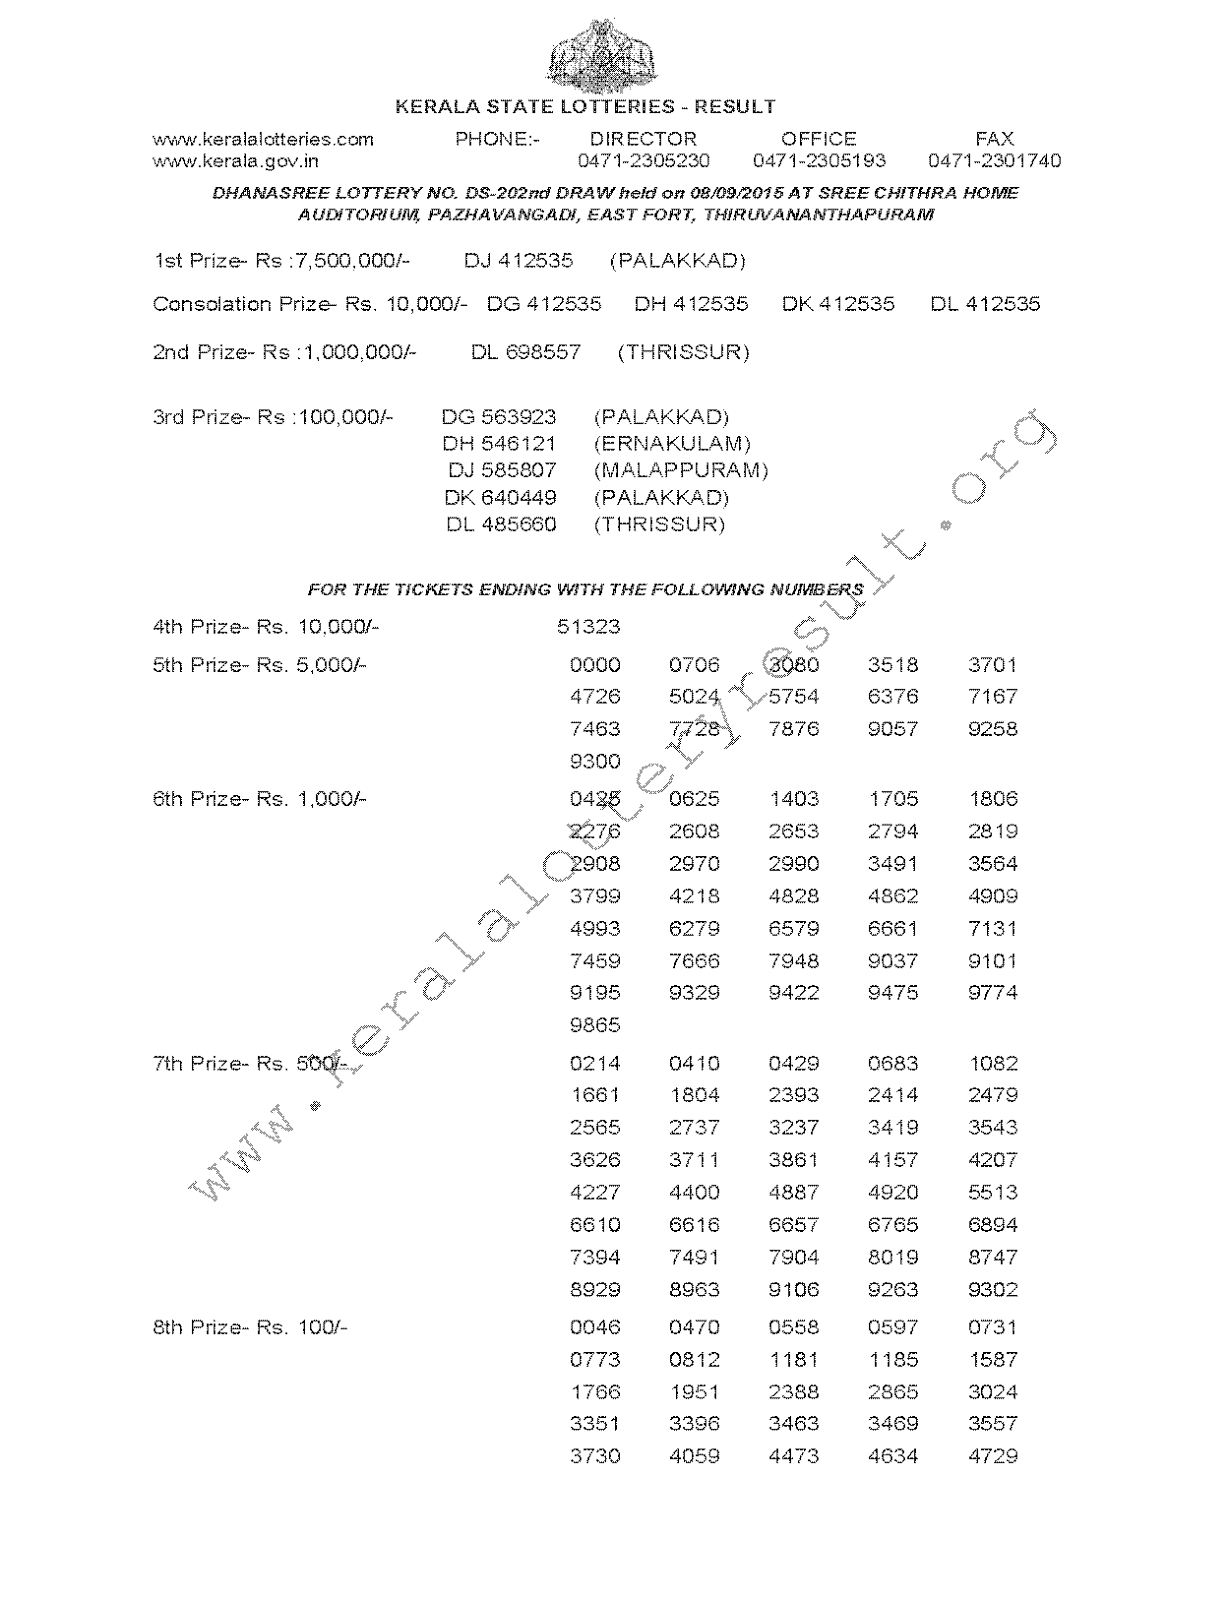 DHANASREE Lottery DS 202 Result 8-9-2015